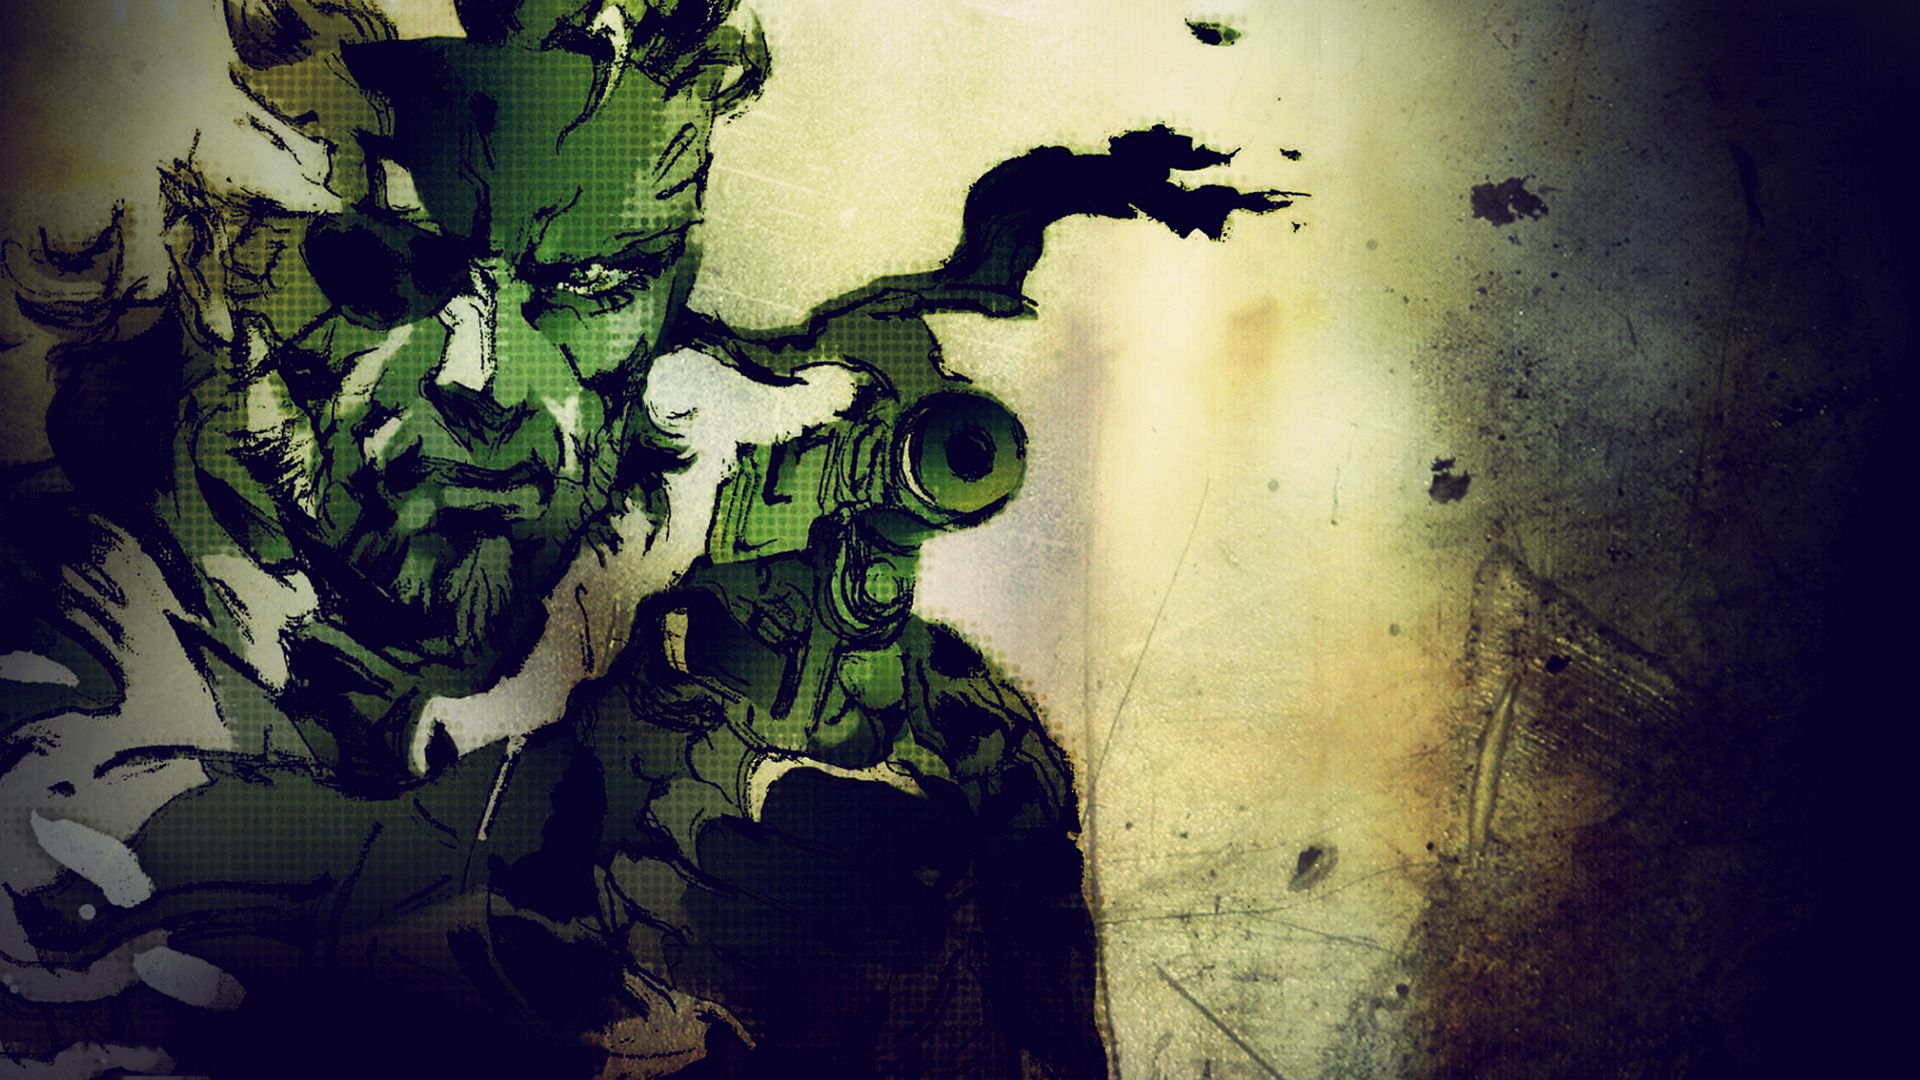 88 Metal Gear Solid HD Wallpapers | Backgrounds - Wallpaper Abyss ...